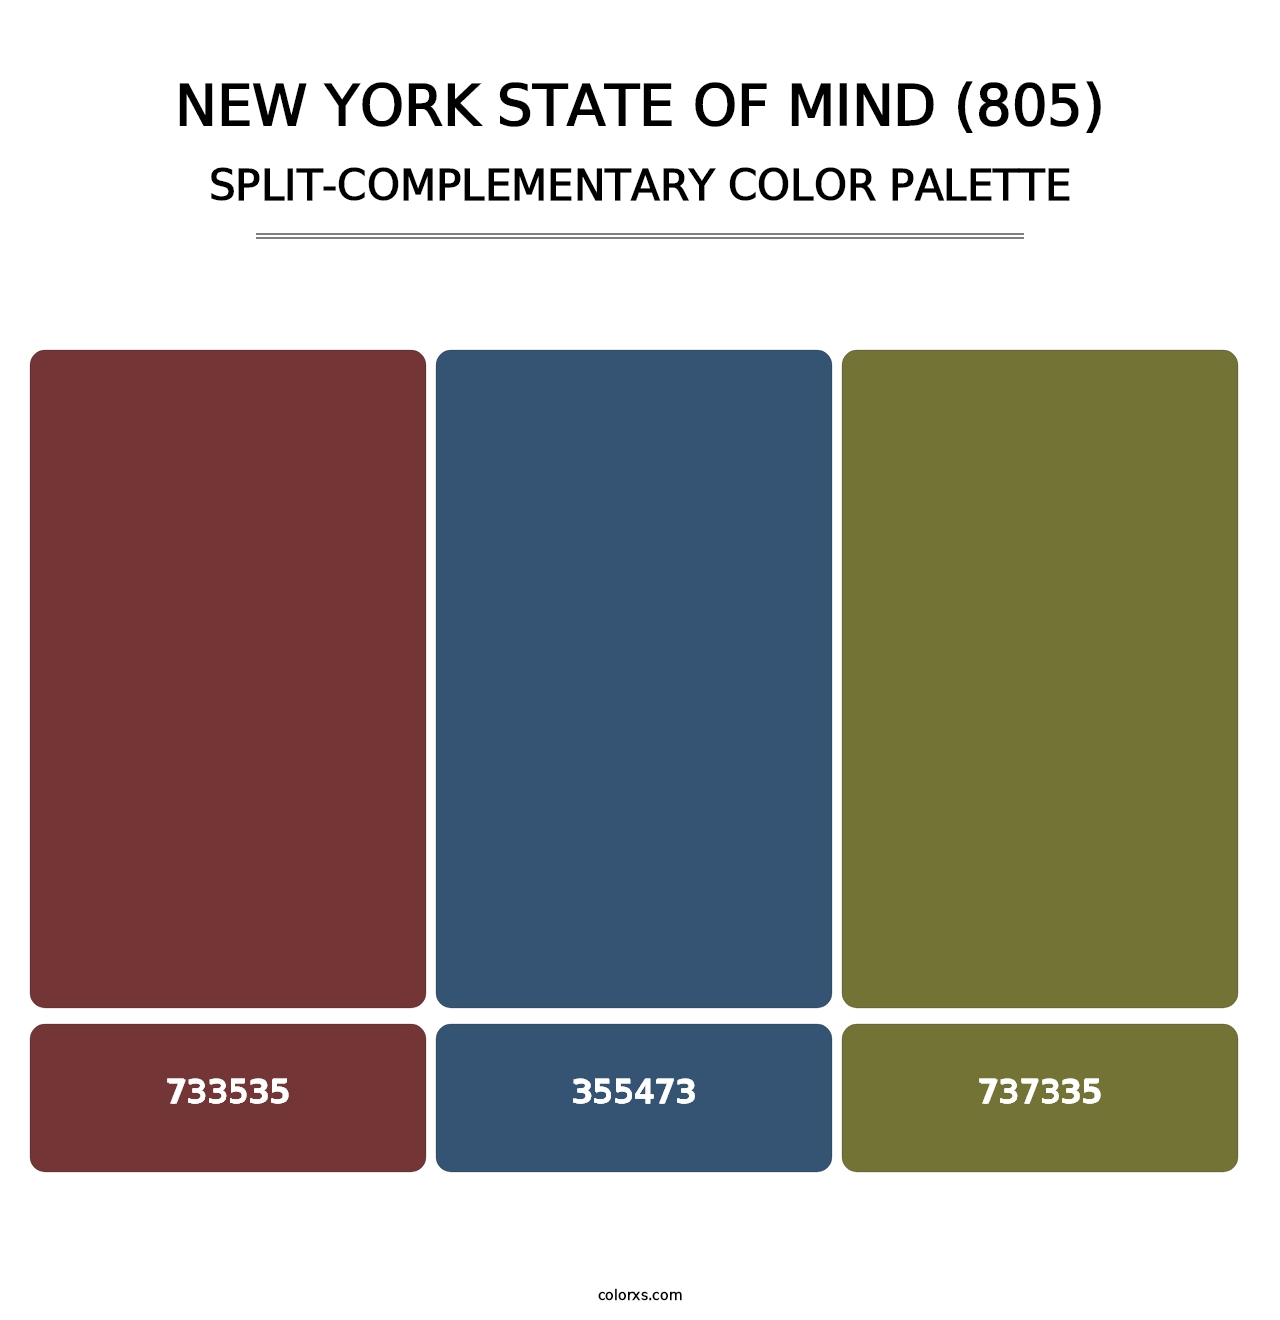 New York State of Mind (805) - Split-Complementary Color Palette